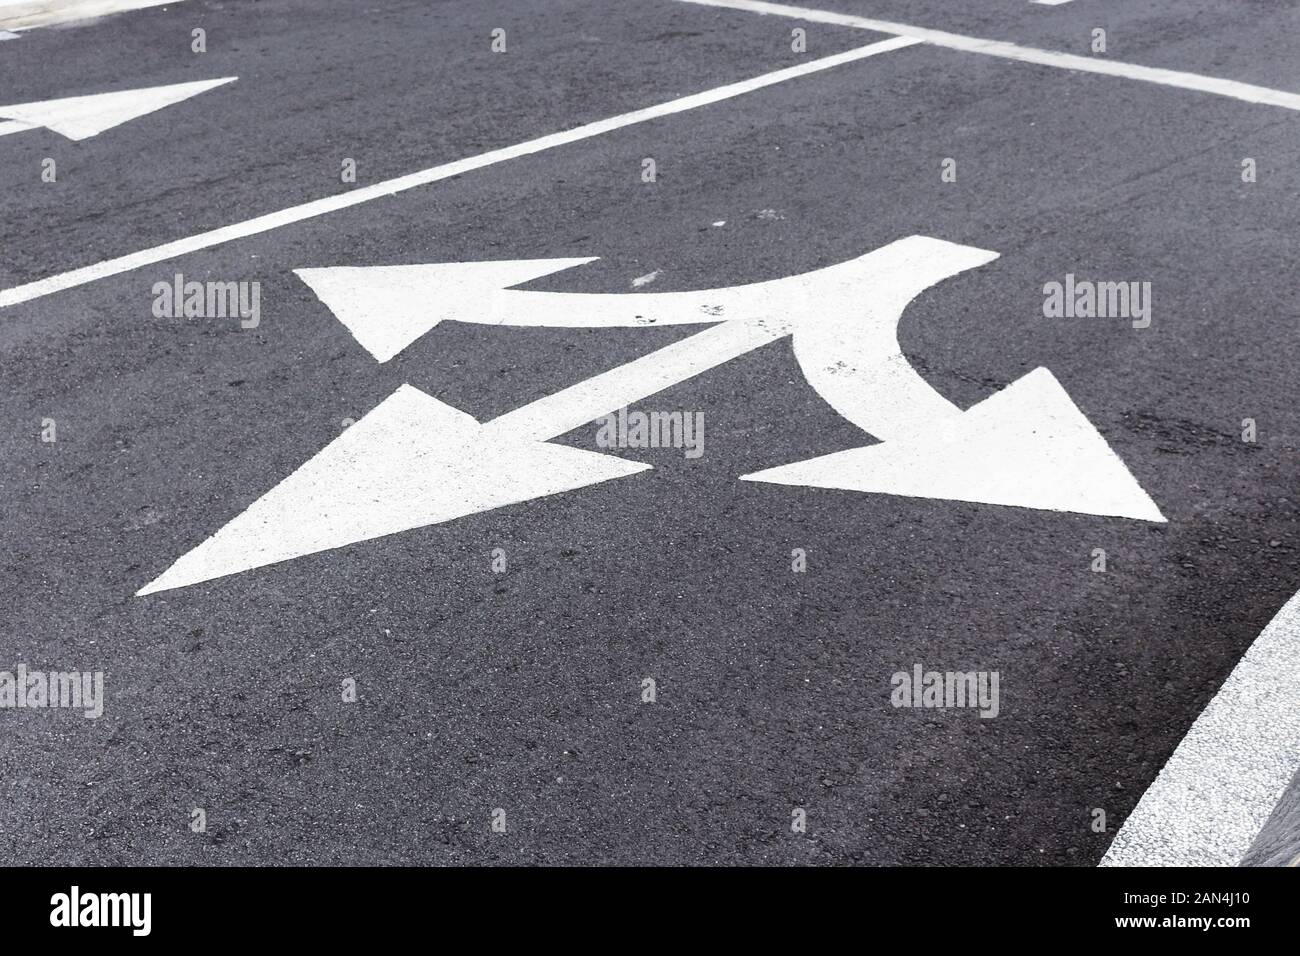 Straight or Turn Left or Right Road Sign on Asphalt. Stock Photo